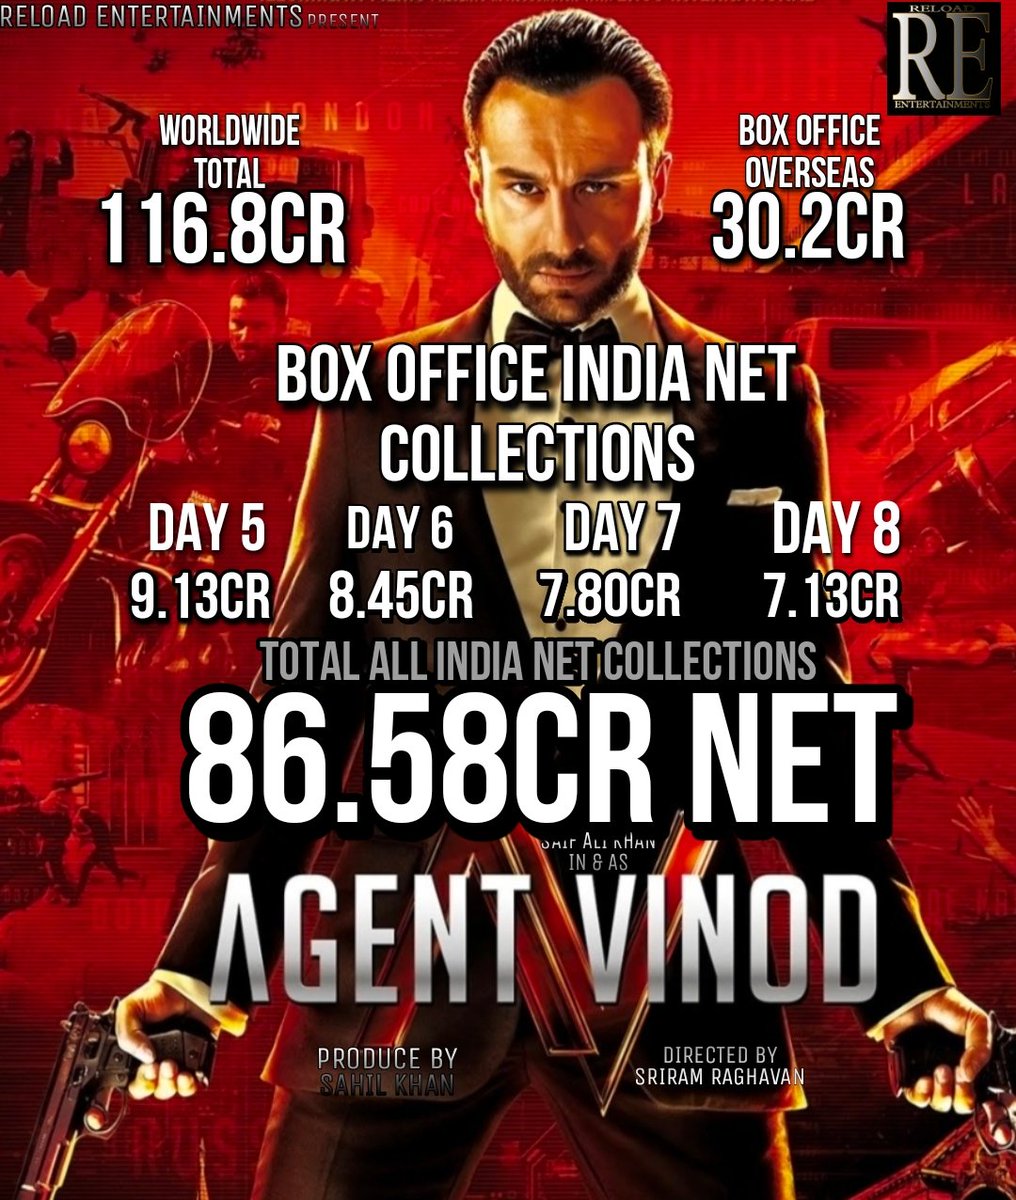 #AgentVinod Box Office report 
.
.
.Celebrate #AgentVinod with #RE only in Cinemas Near You Now !